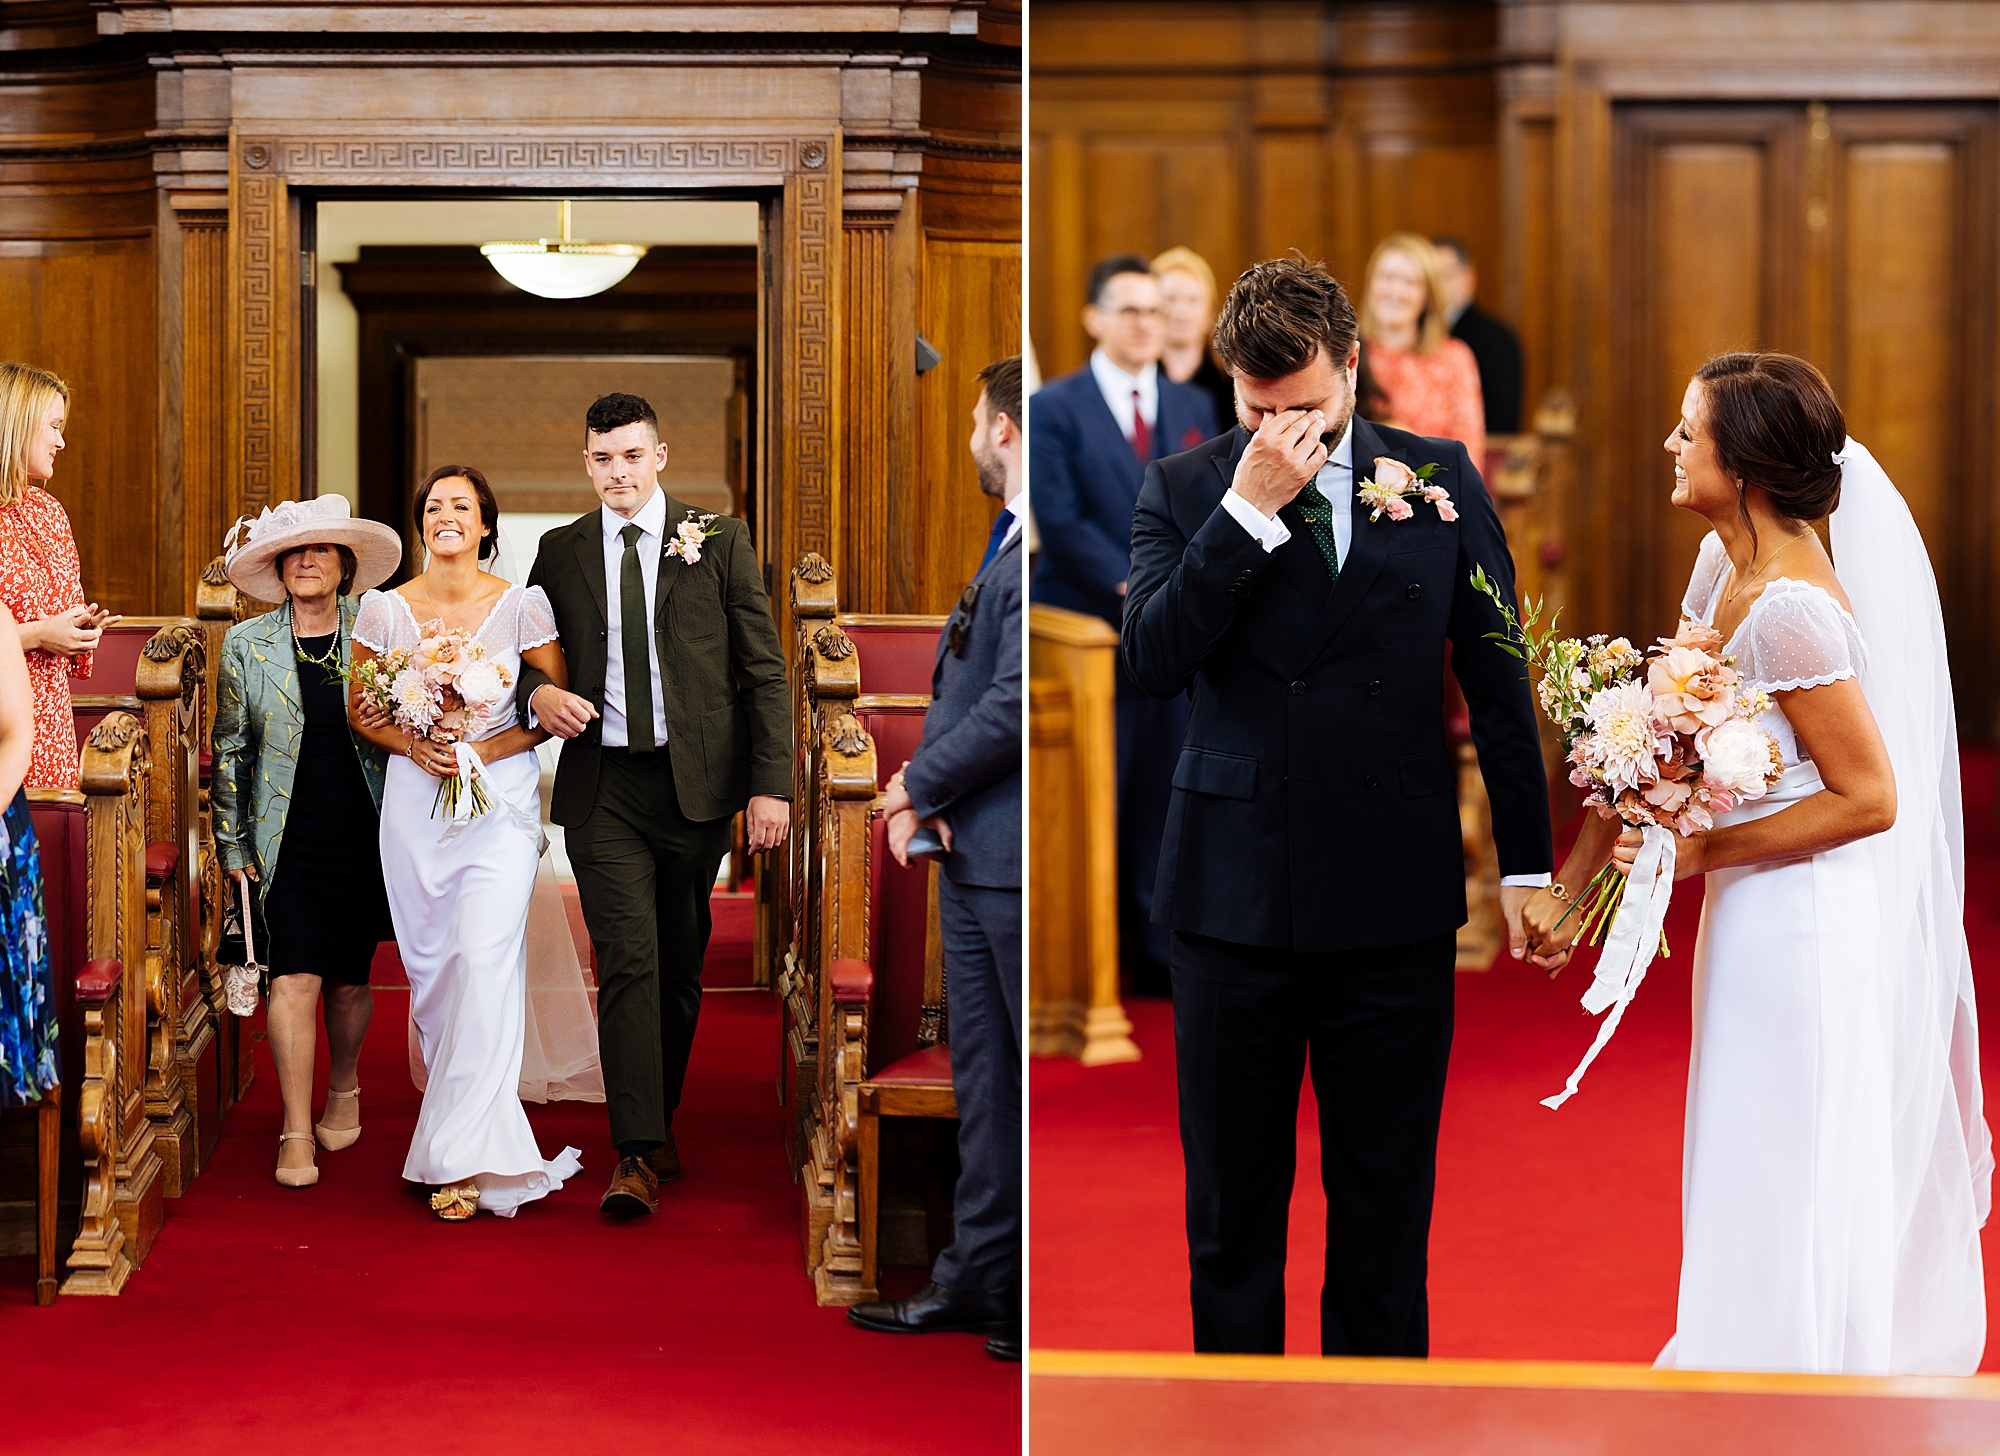 An intimate wedding at the beautiful town hall